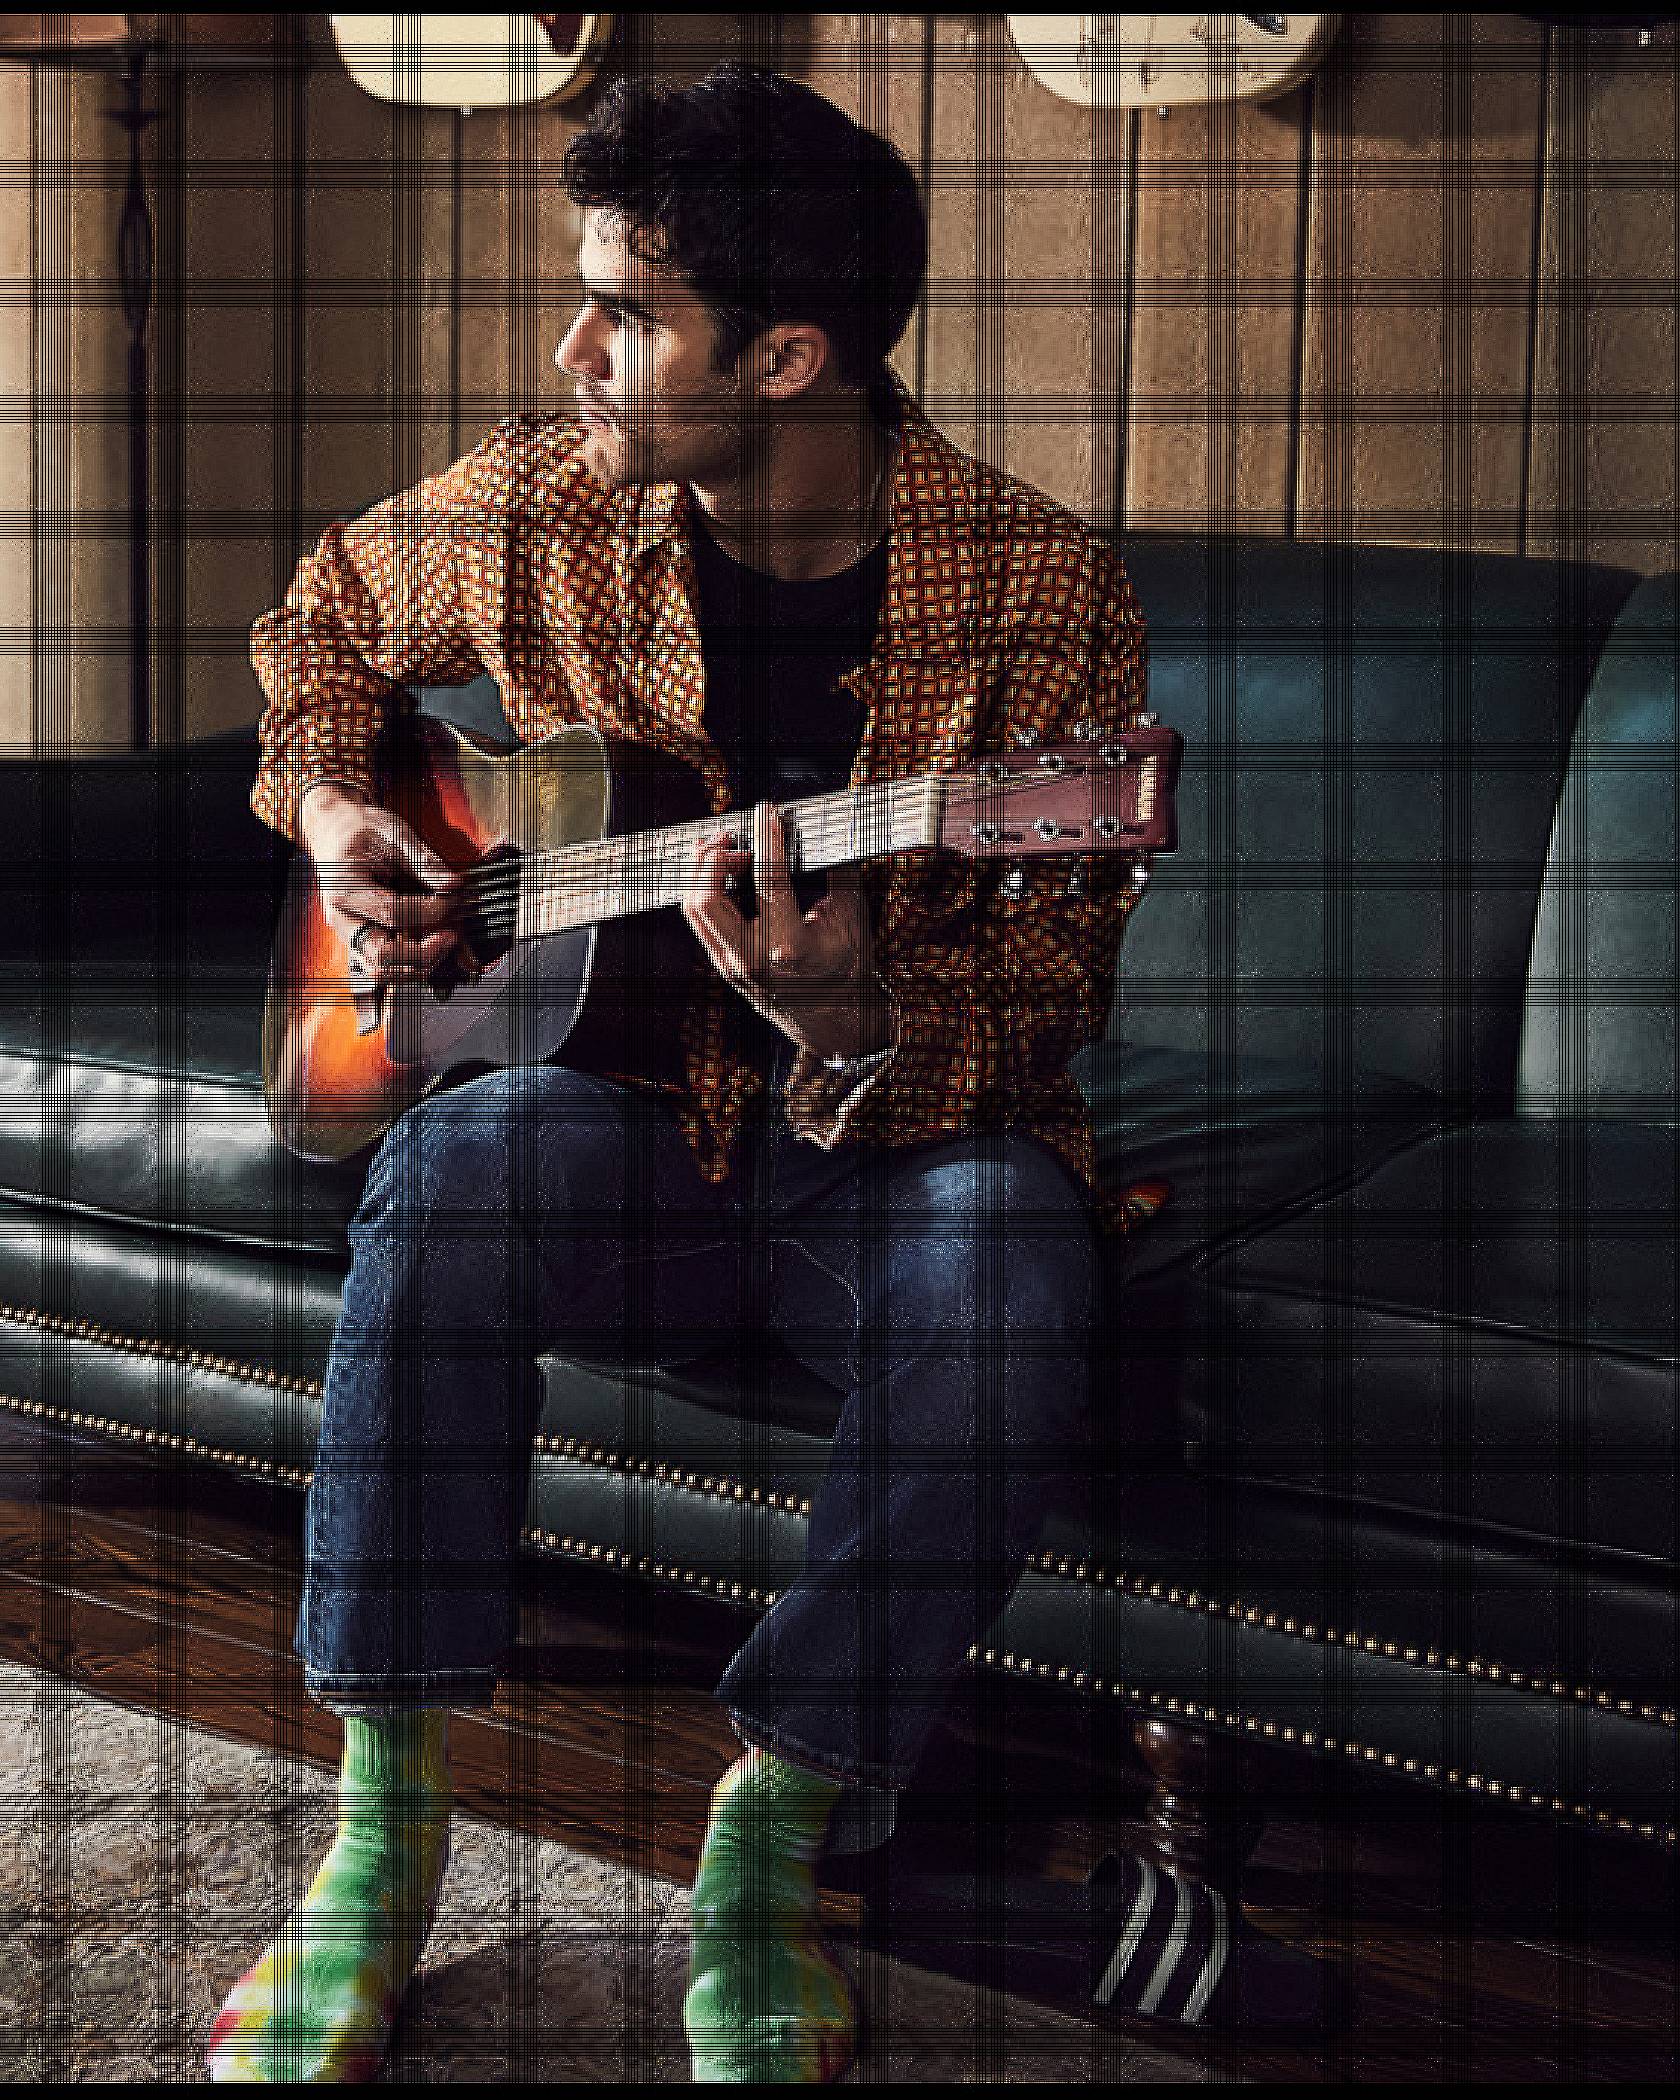 Criss sitting on the couch playing the guitar.